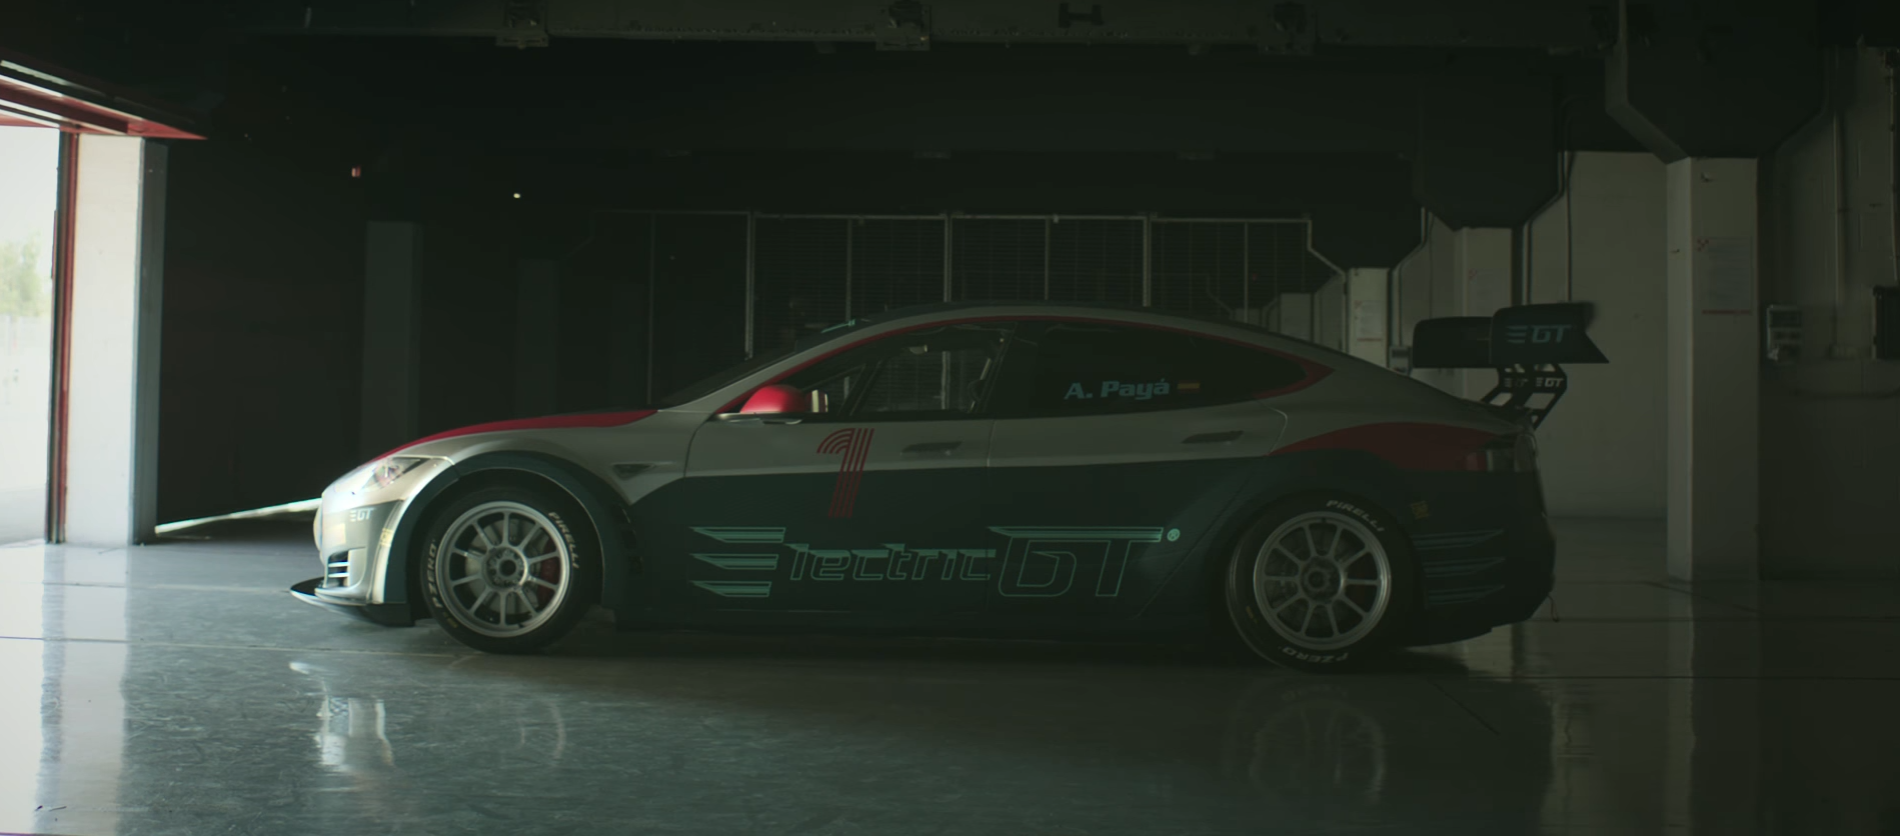 electric-gt